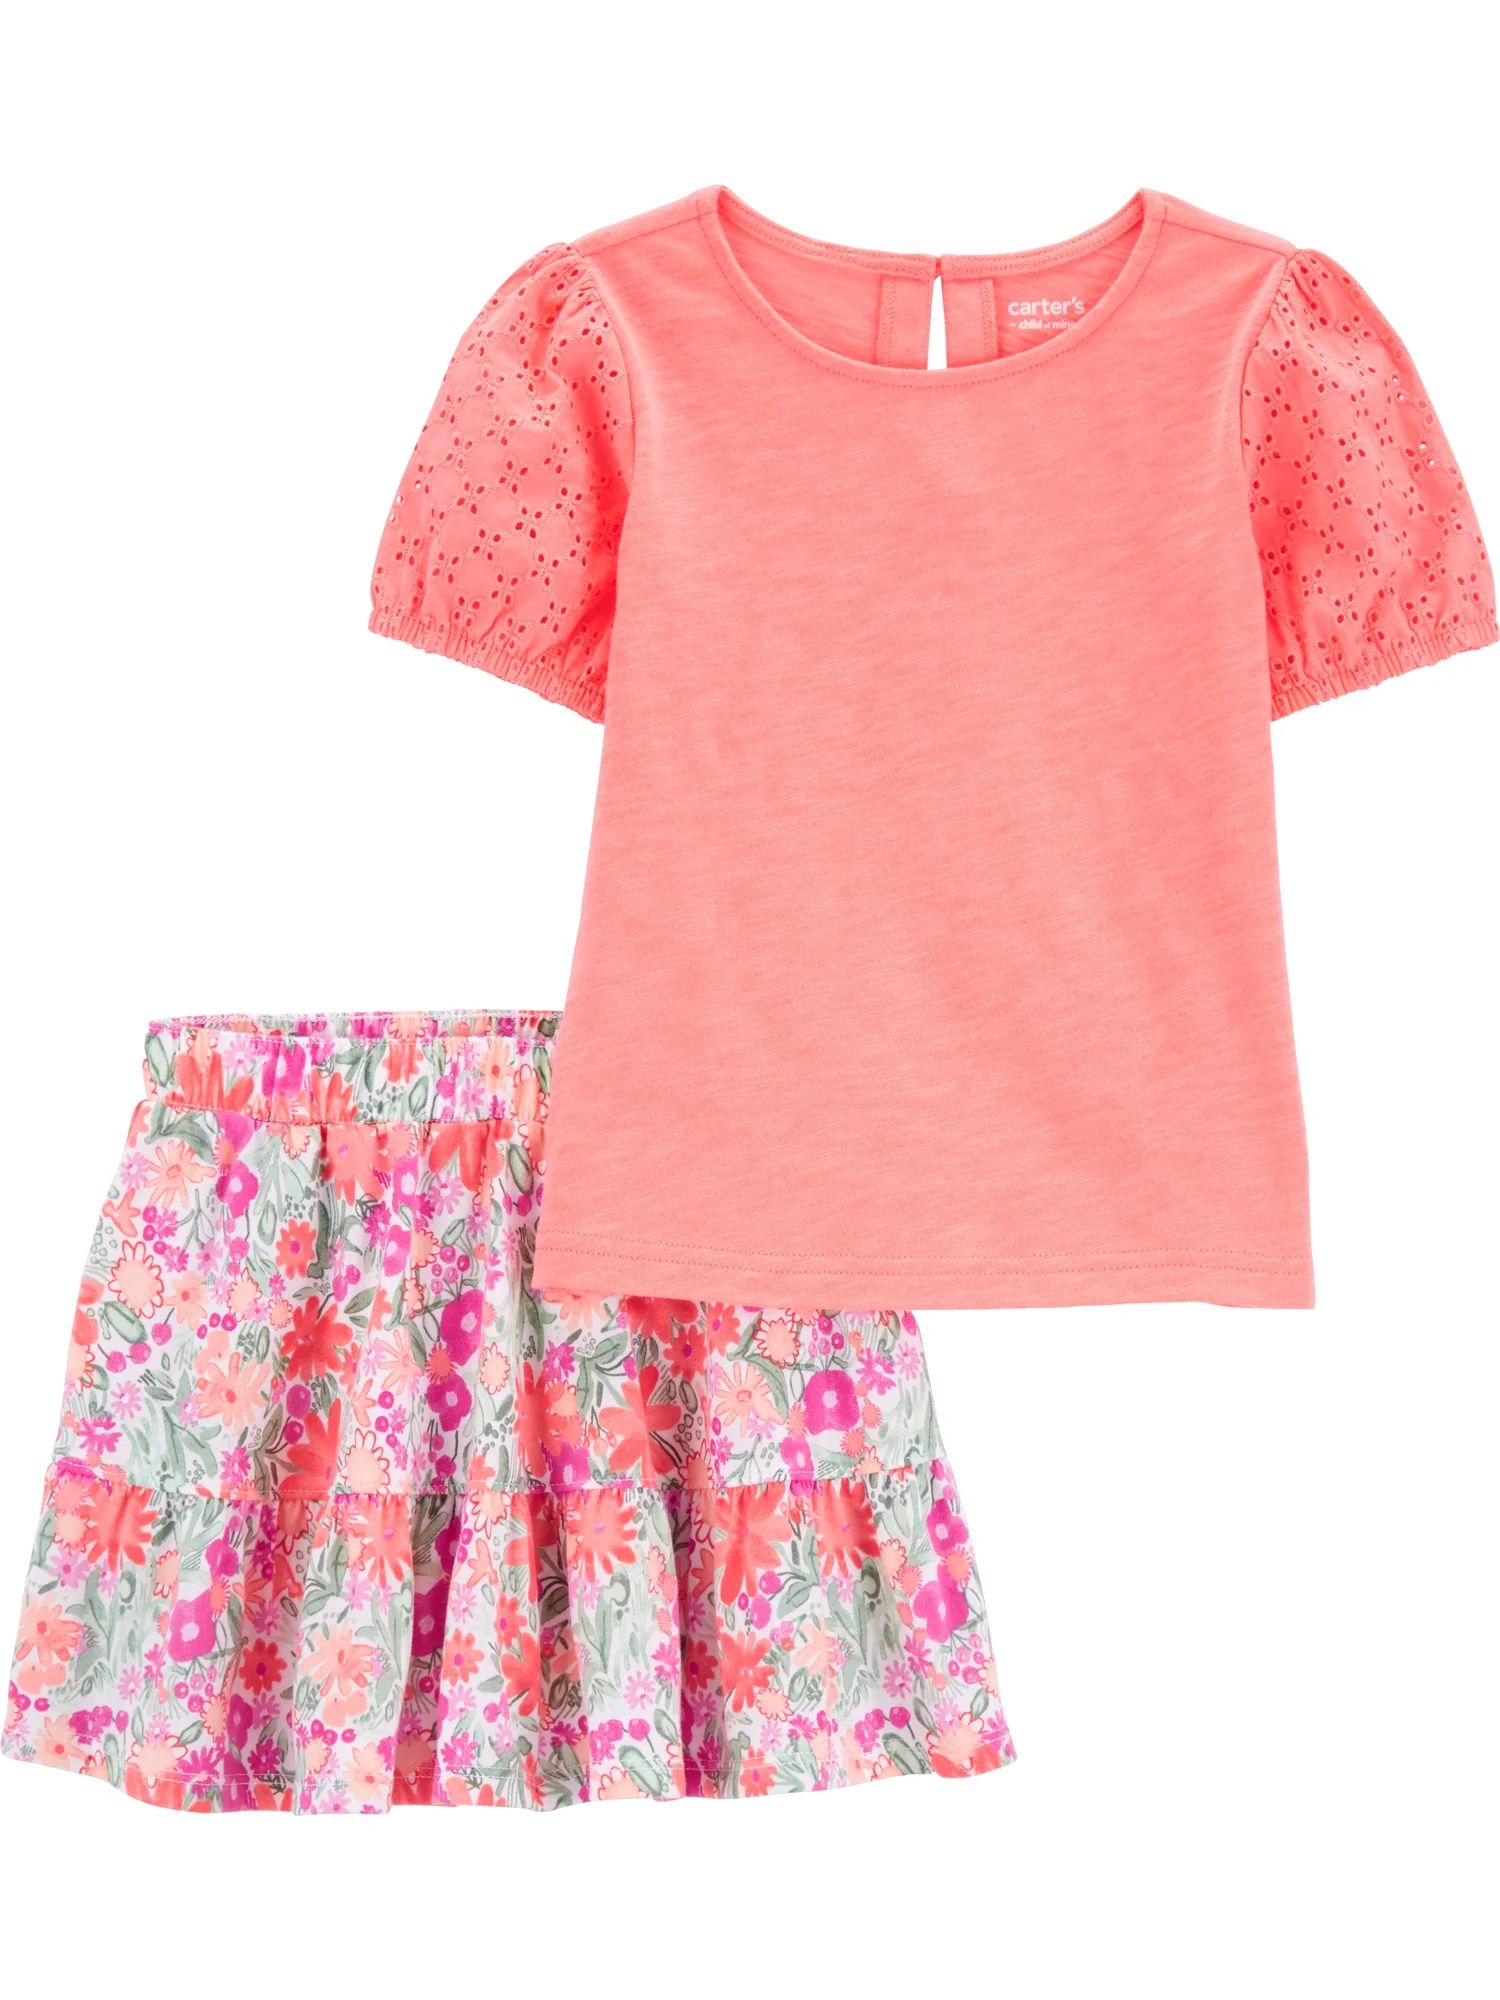 Carter's Child of Mine Toddler Girl Skirt Outfit Set, 2-Piece, Sizes 12M-5T | Walmart (US)